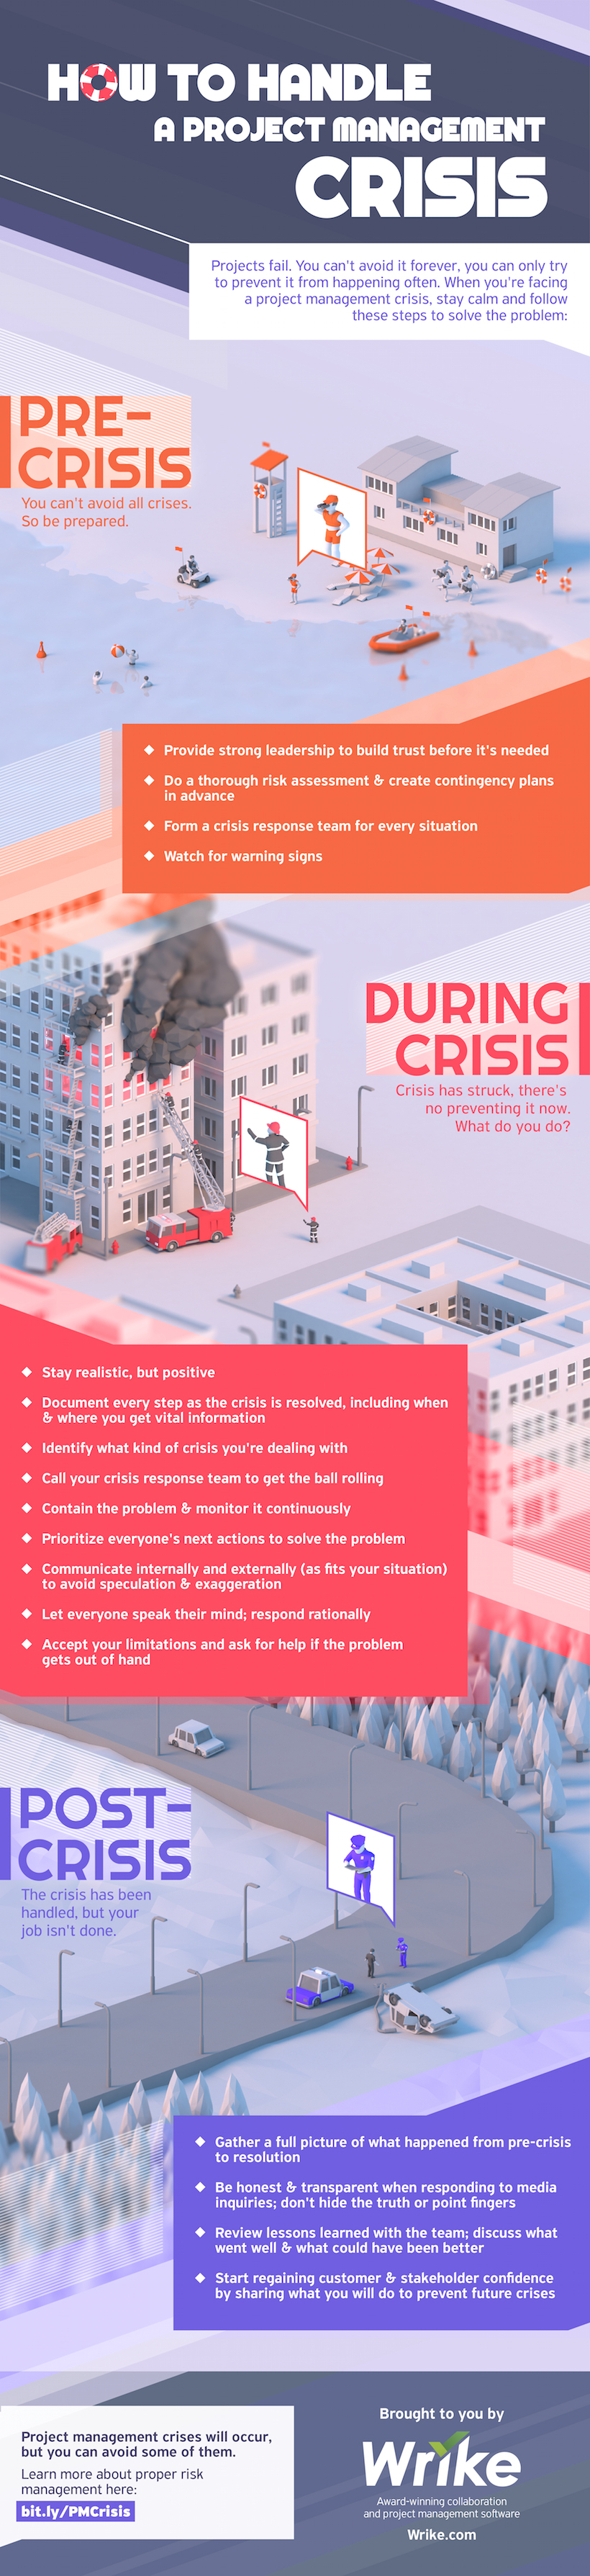 How to Handle a Project Management Crisis (Infographic)